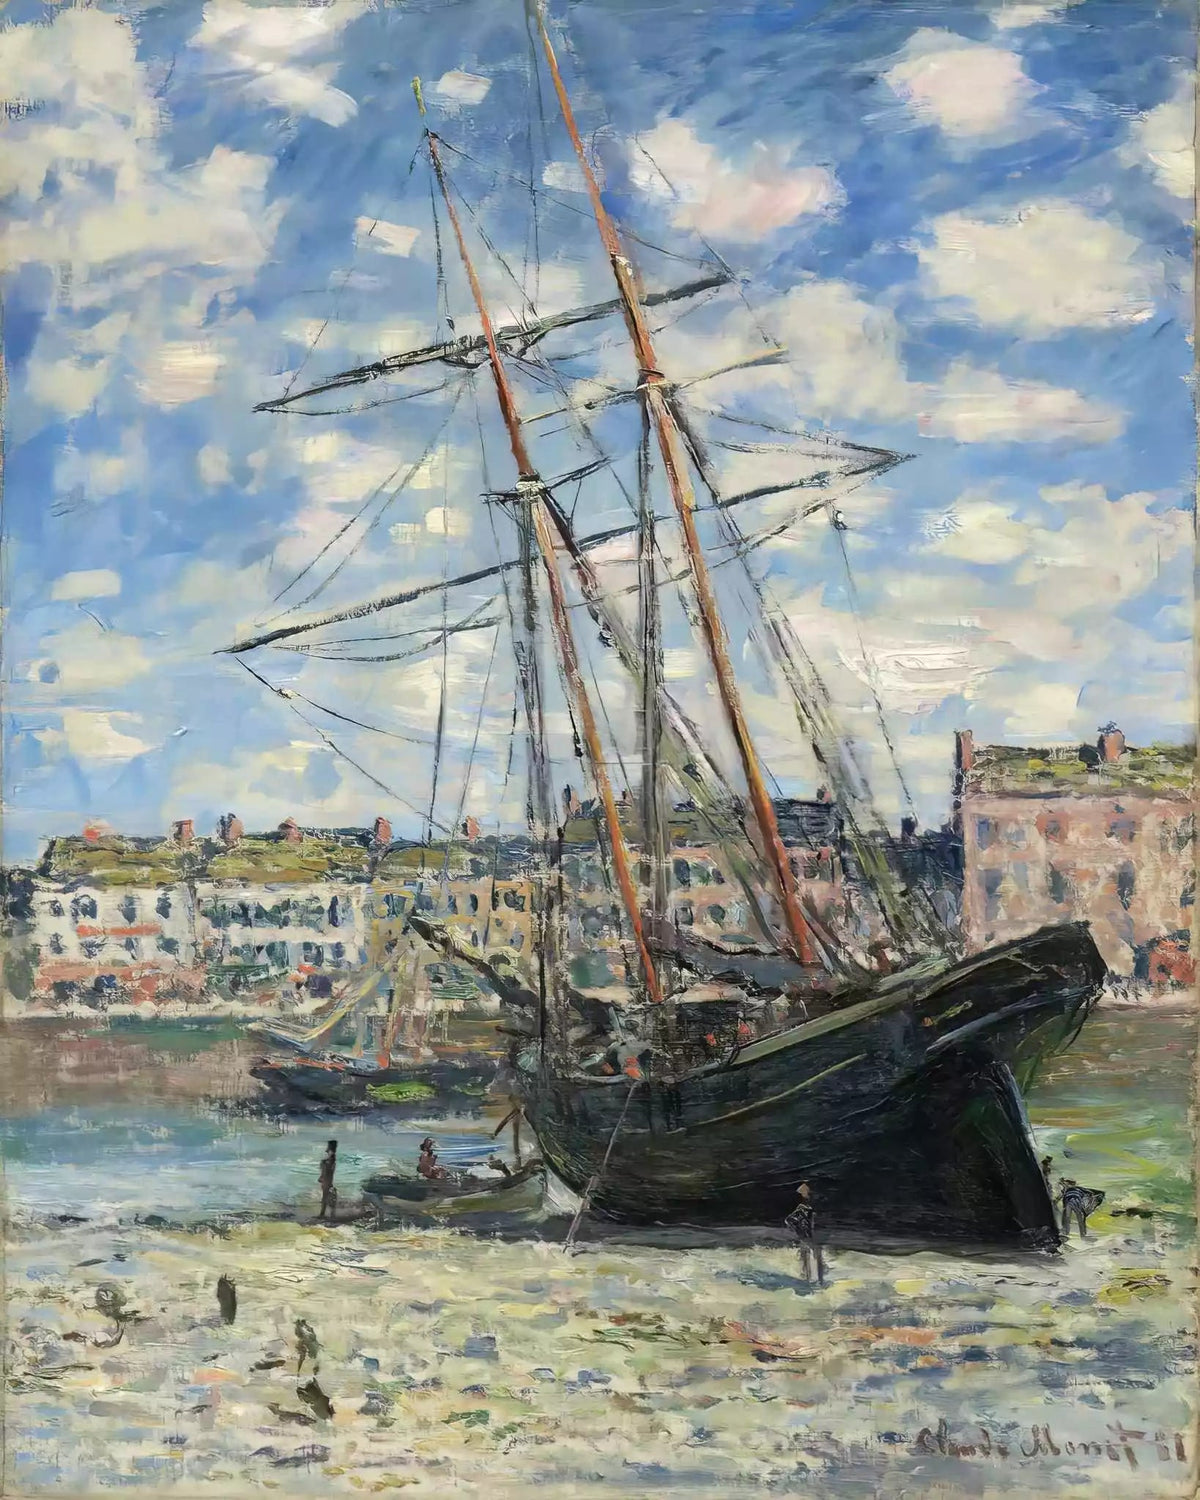 Boat Lying at Low Tide (1881) - Diamond Painting-Diamond Painting-16"x20" (40x50cm)-Canvas by Numbers US